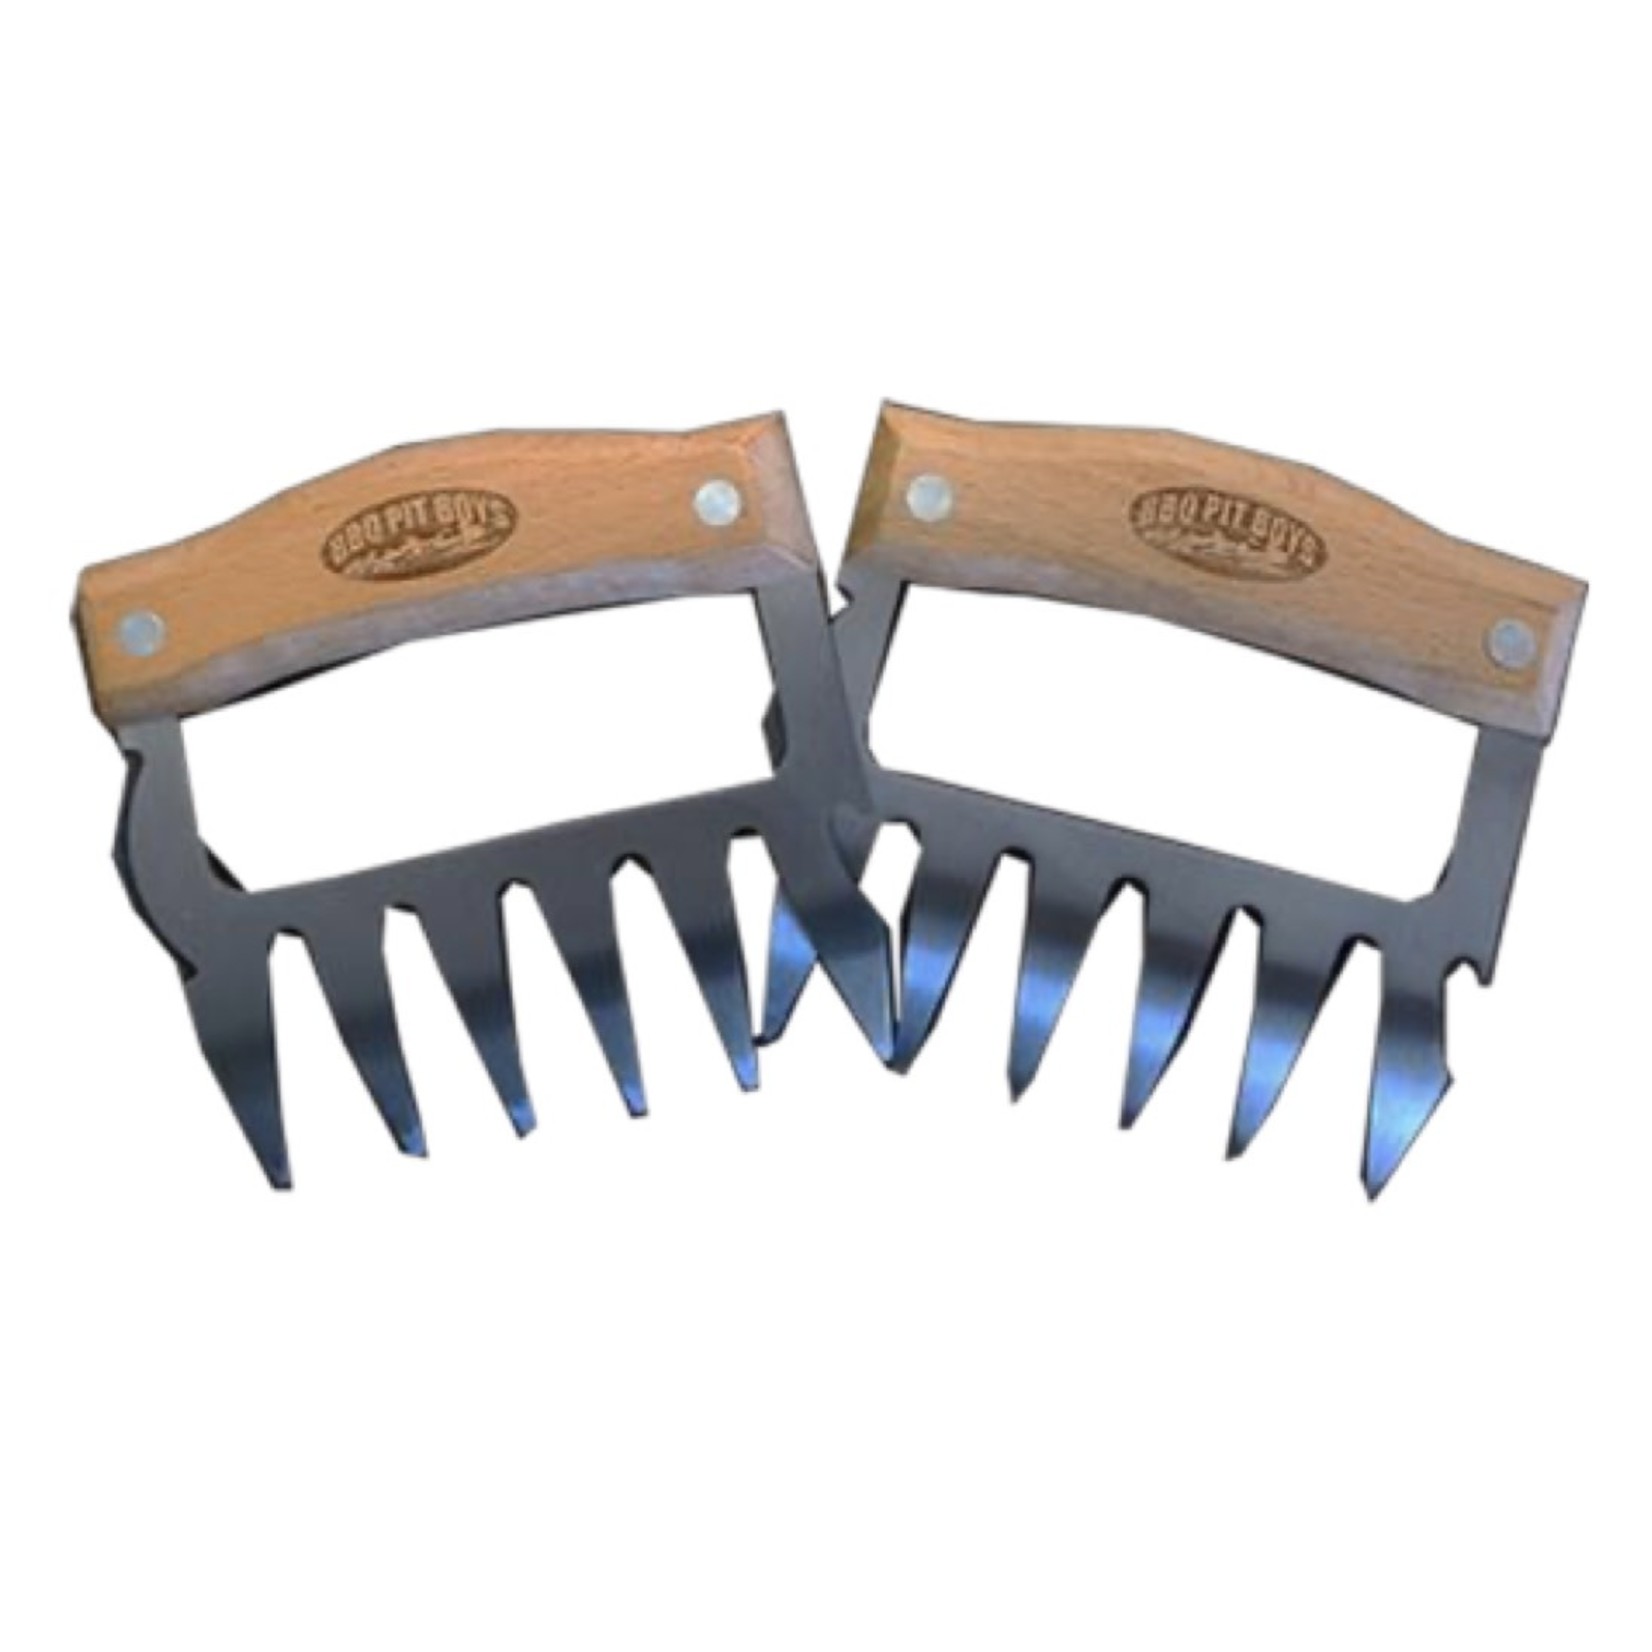 BBQ PIT BOYS claws / lifters